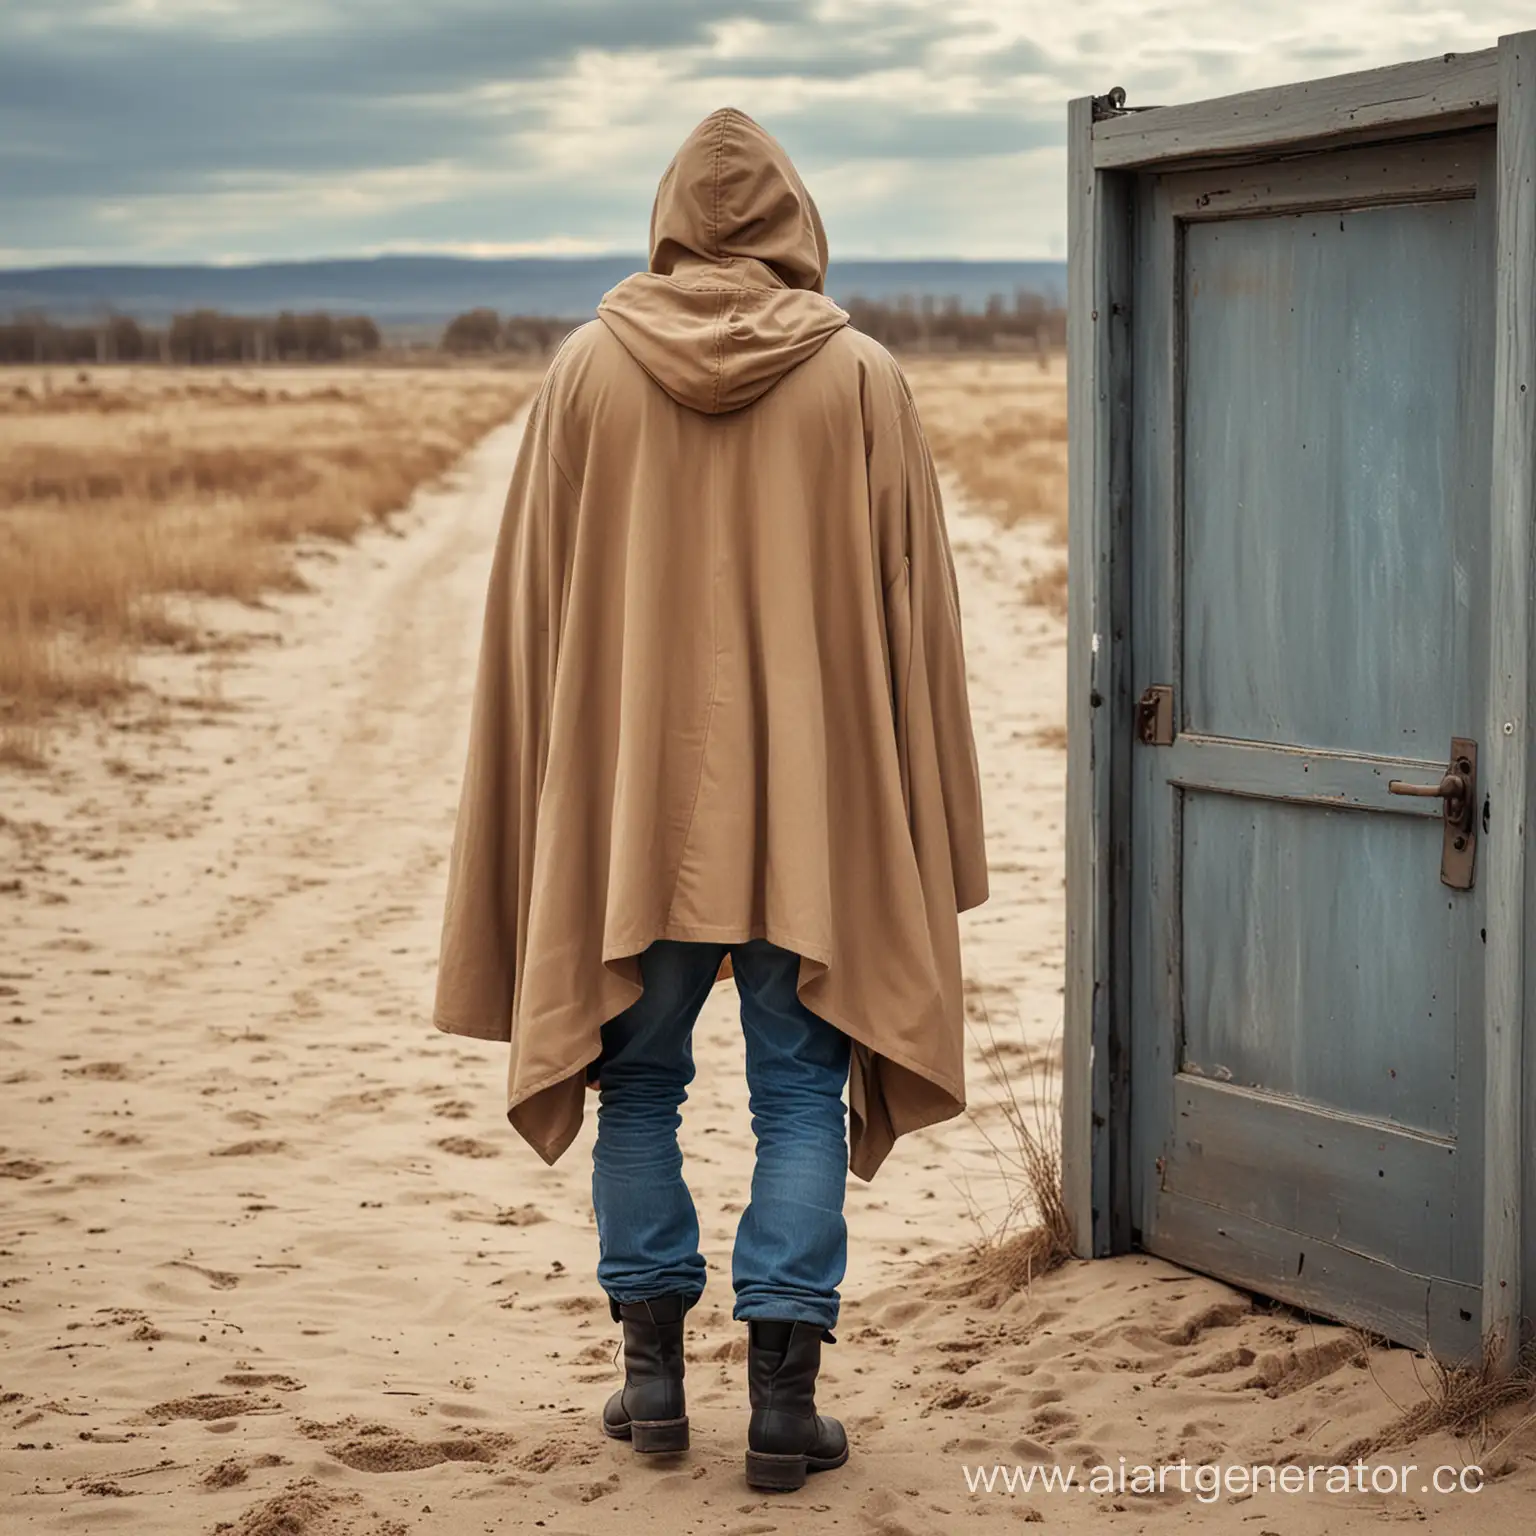 Mysterious-Figure-in-SandColored-Hooded-Cloak-by-Closing-Portal